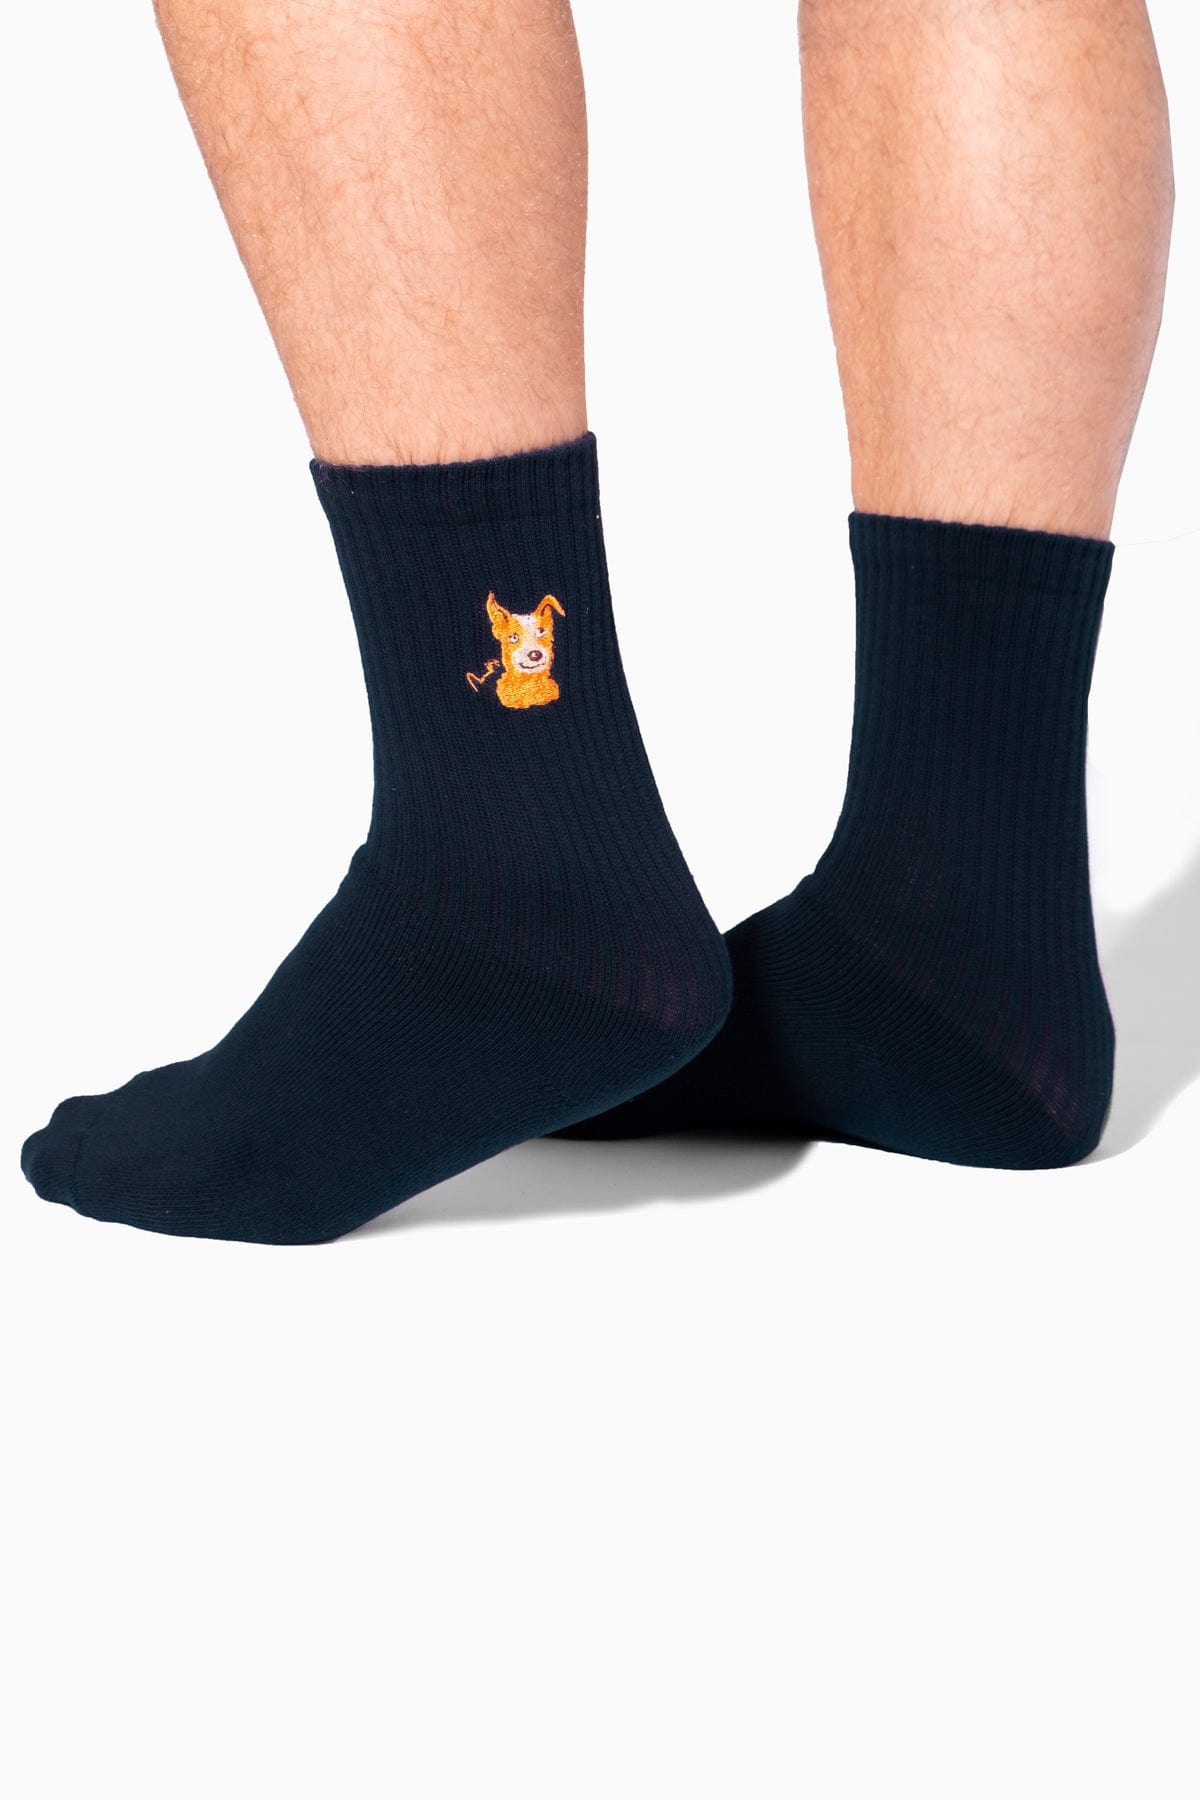 Swoopy Bois Crew Sock - 3 Pack | TradeMutt Accessories